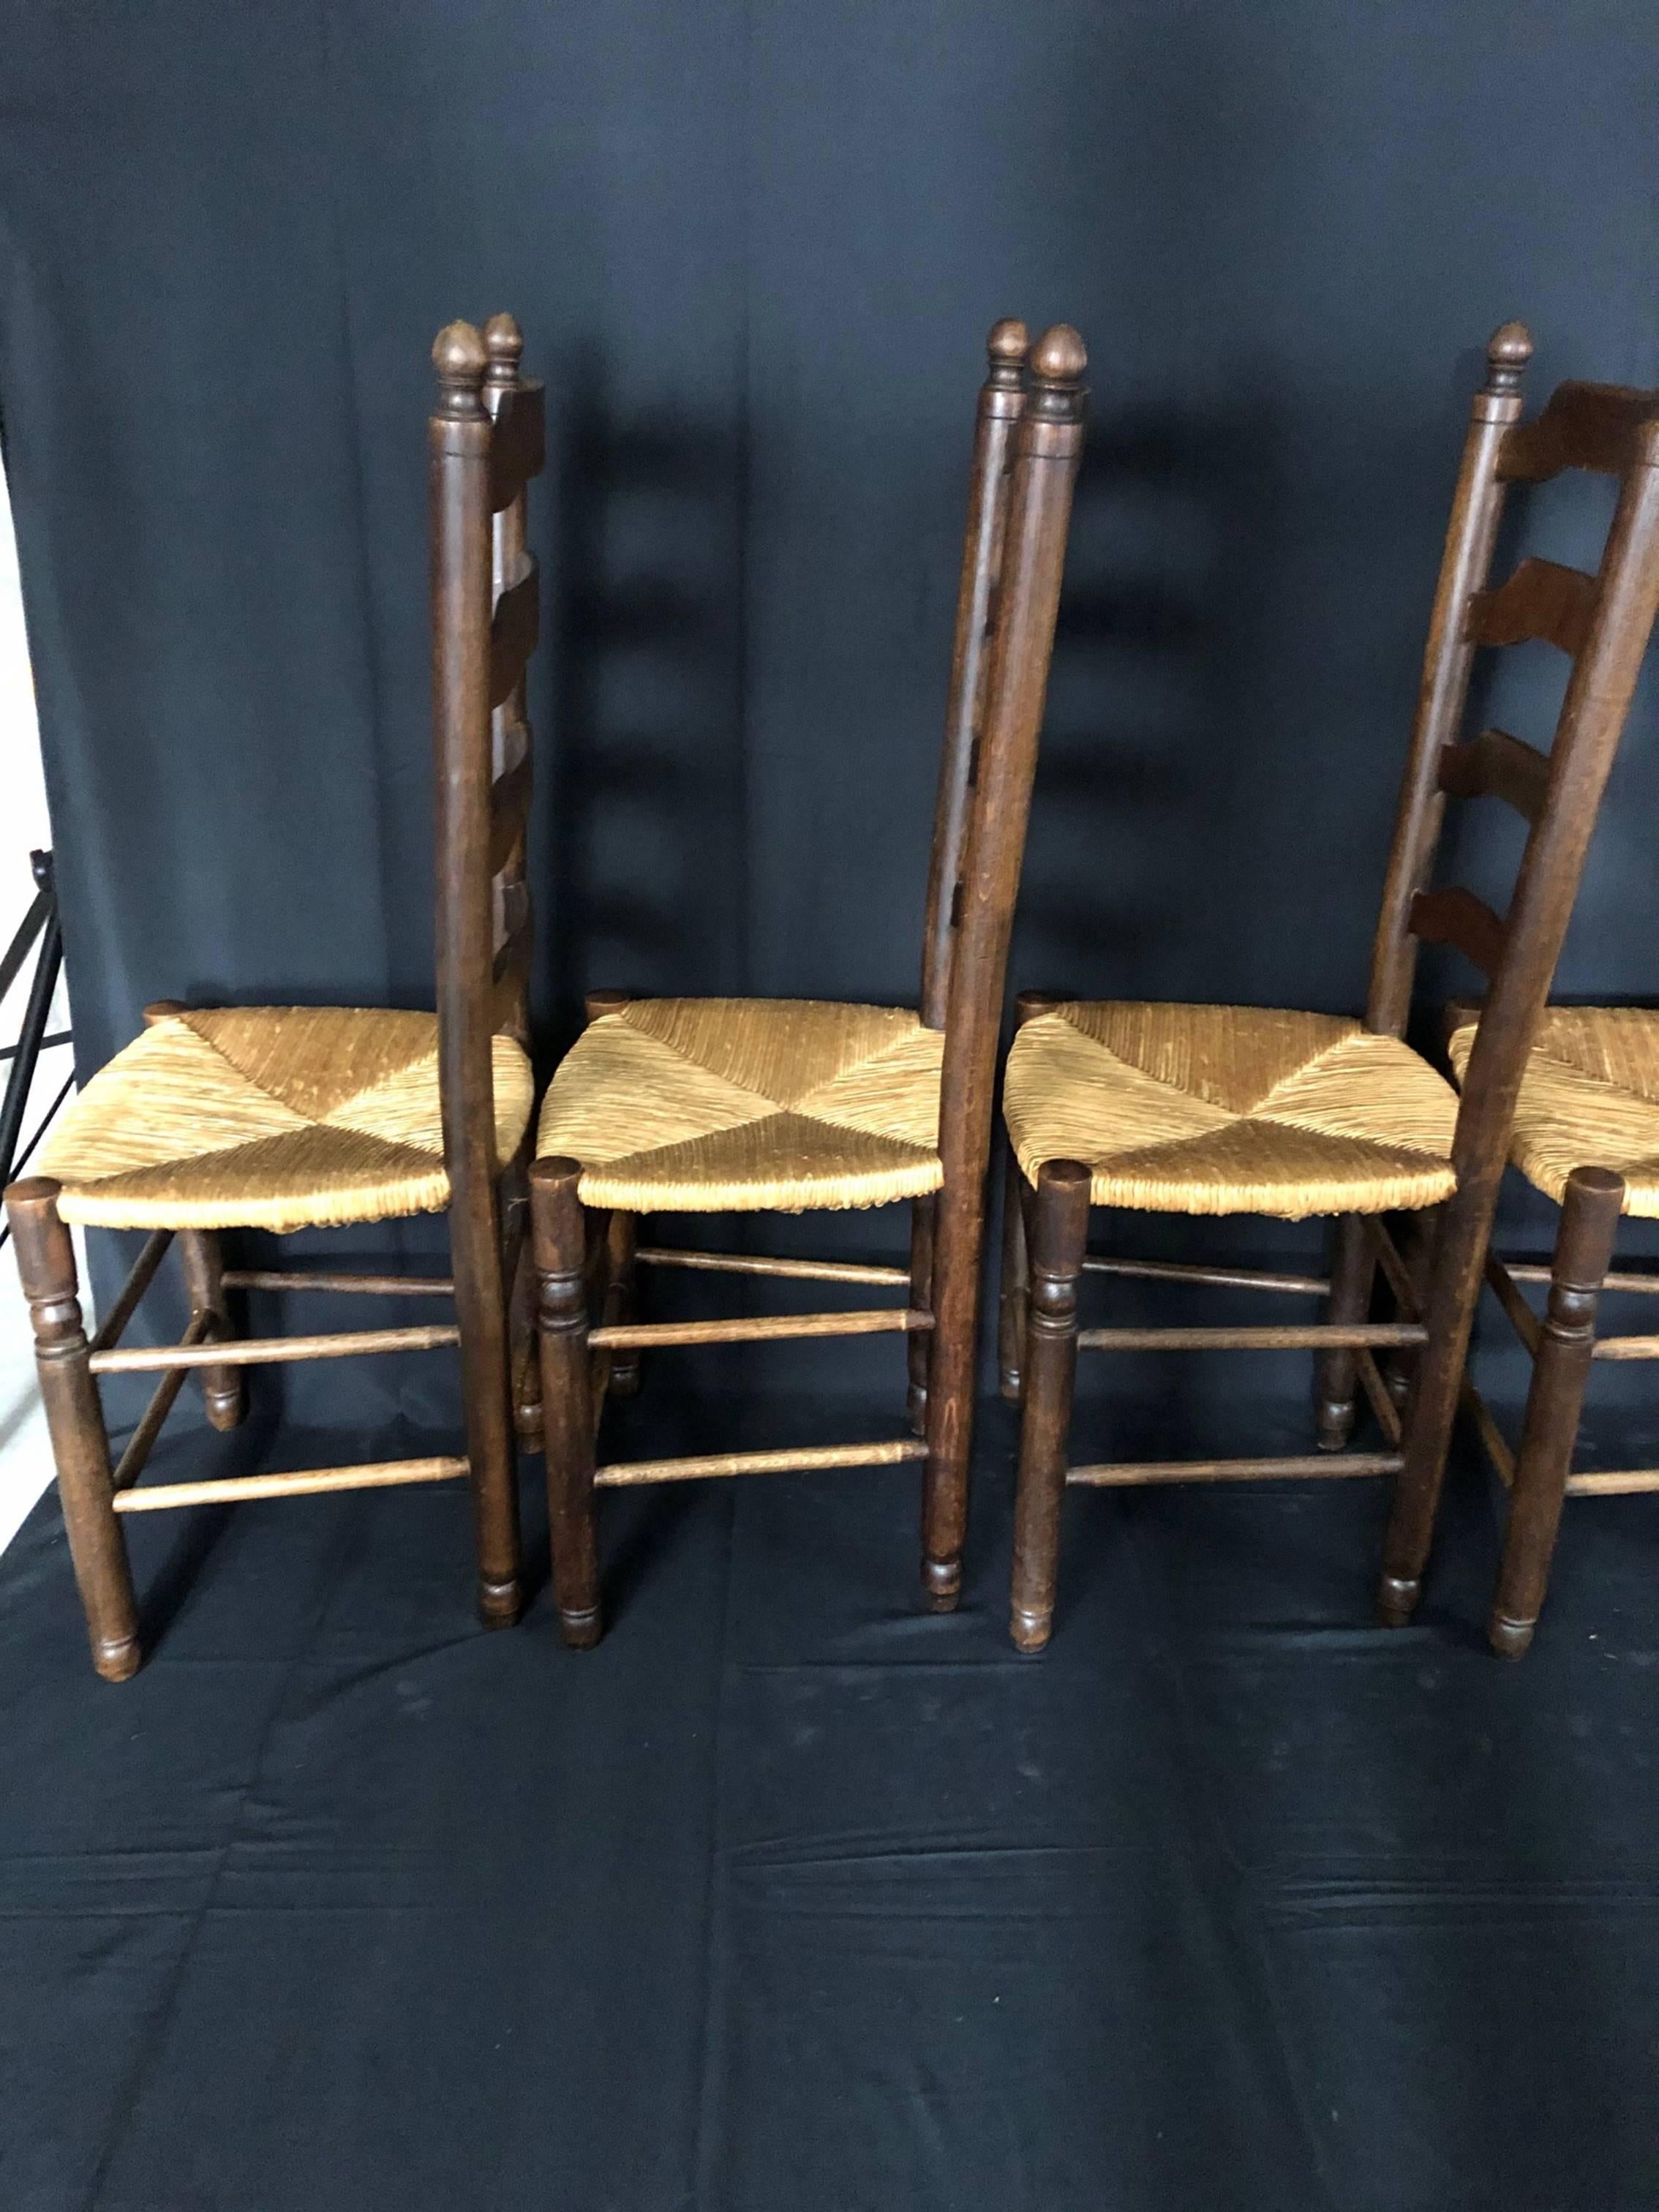 Classic set of 6 French Country ladderback dining chairs with rush seats from Normandy in great condition. #5123.